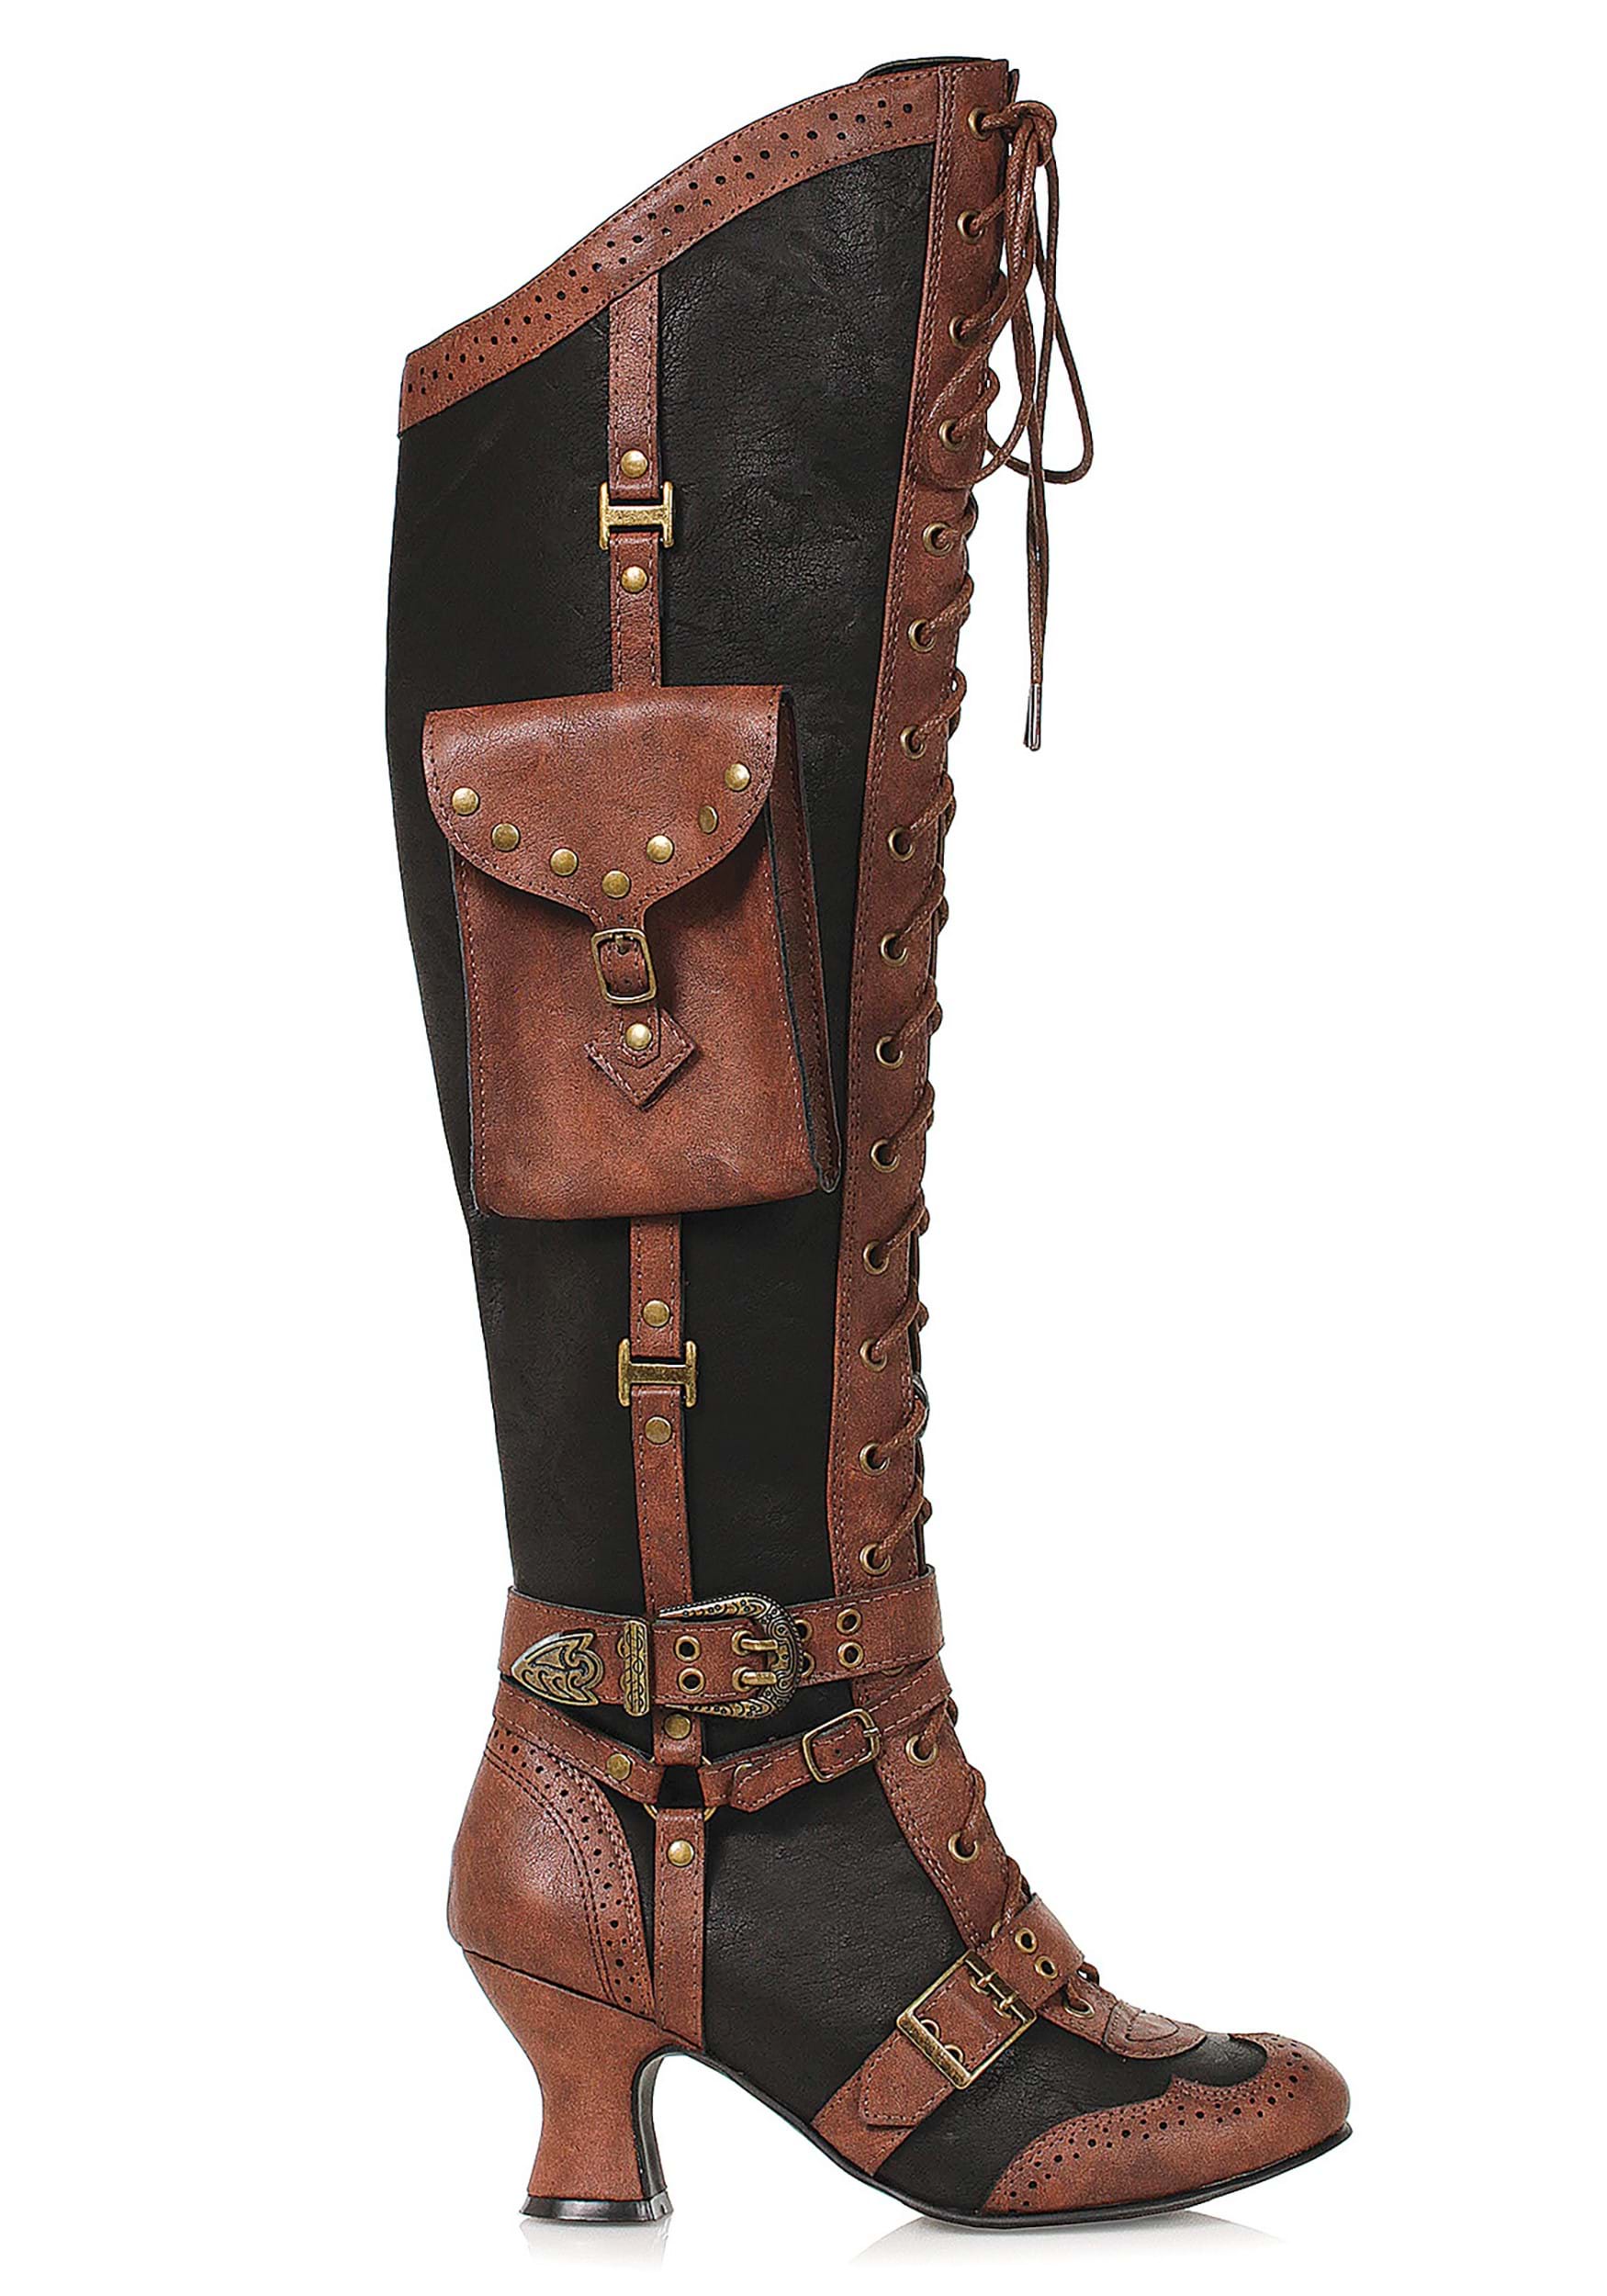 Image of Lace Up Steampunk Heeled Boots ID EE254INGRIDBR-8